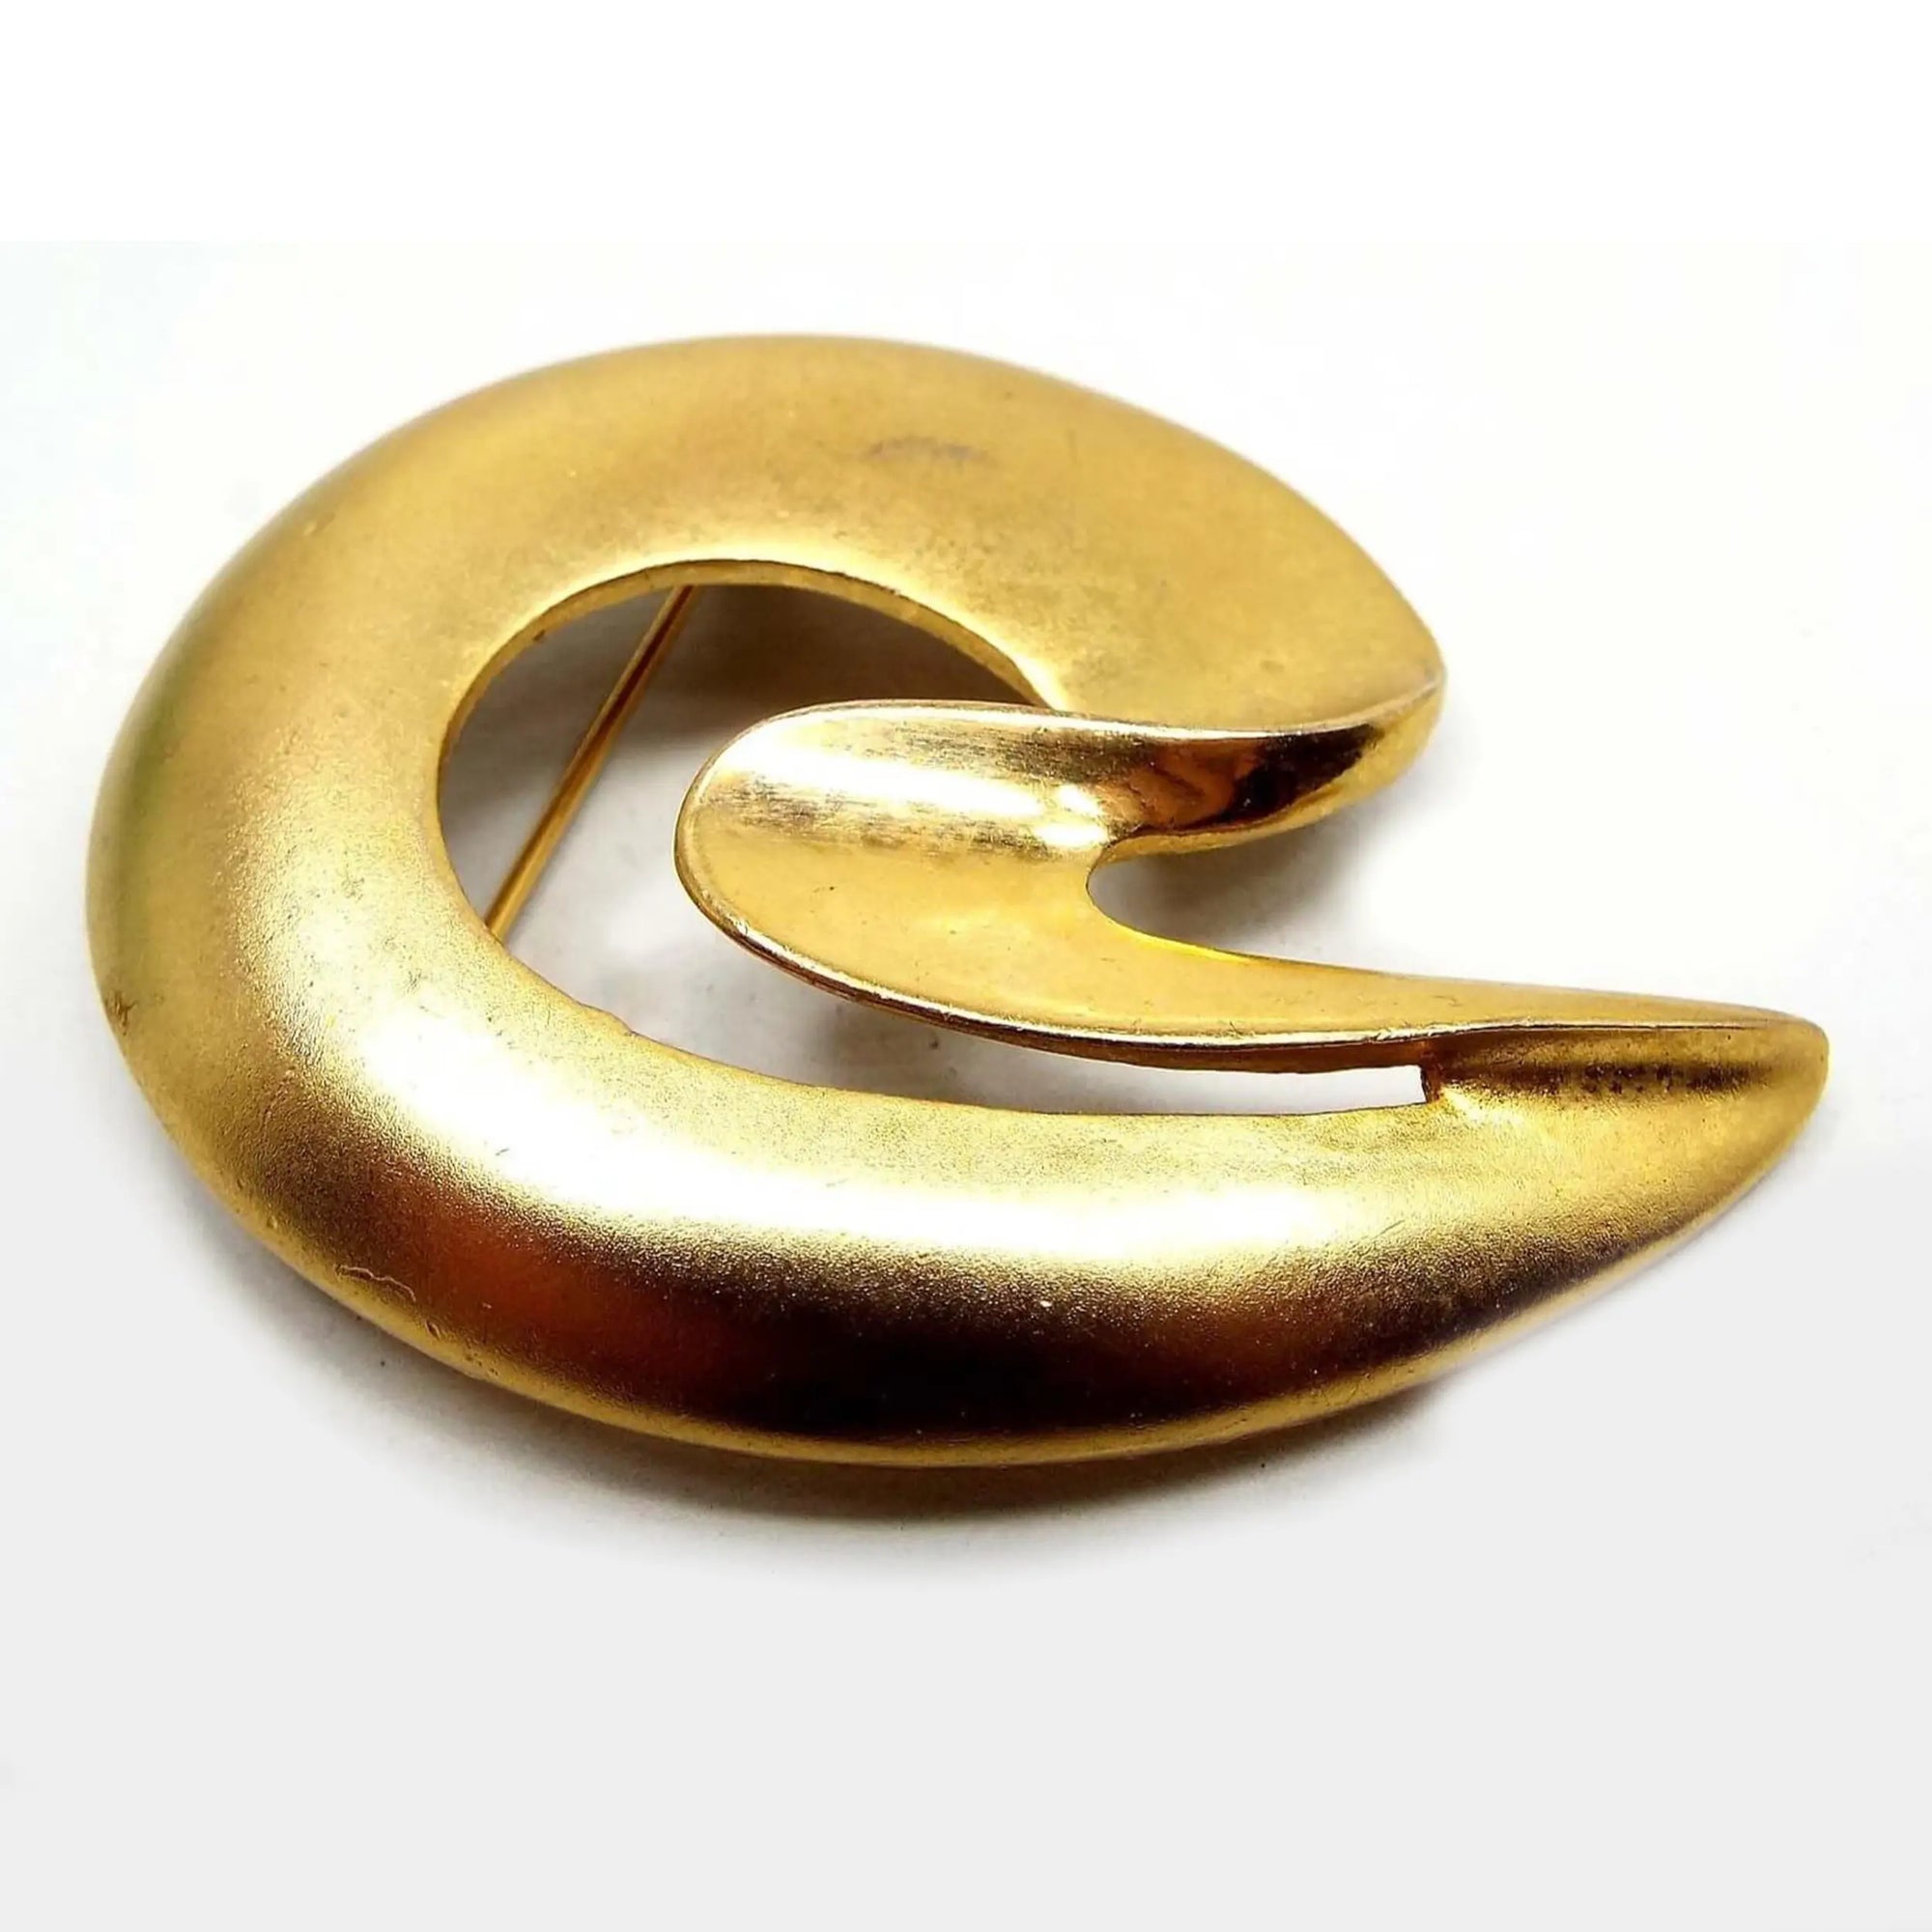 Front view of the retro vintage Mod style brooch pin. It is matte gold tone in color. It has a curved almost C shaped design with an open middle area.